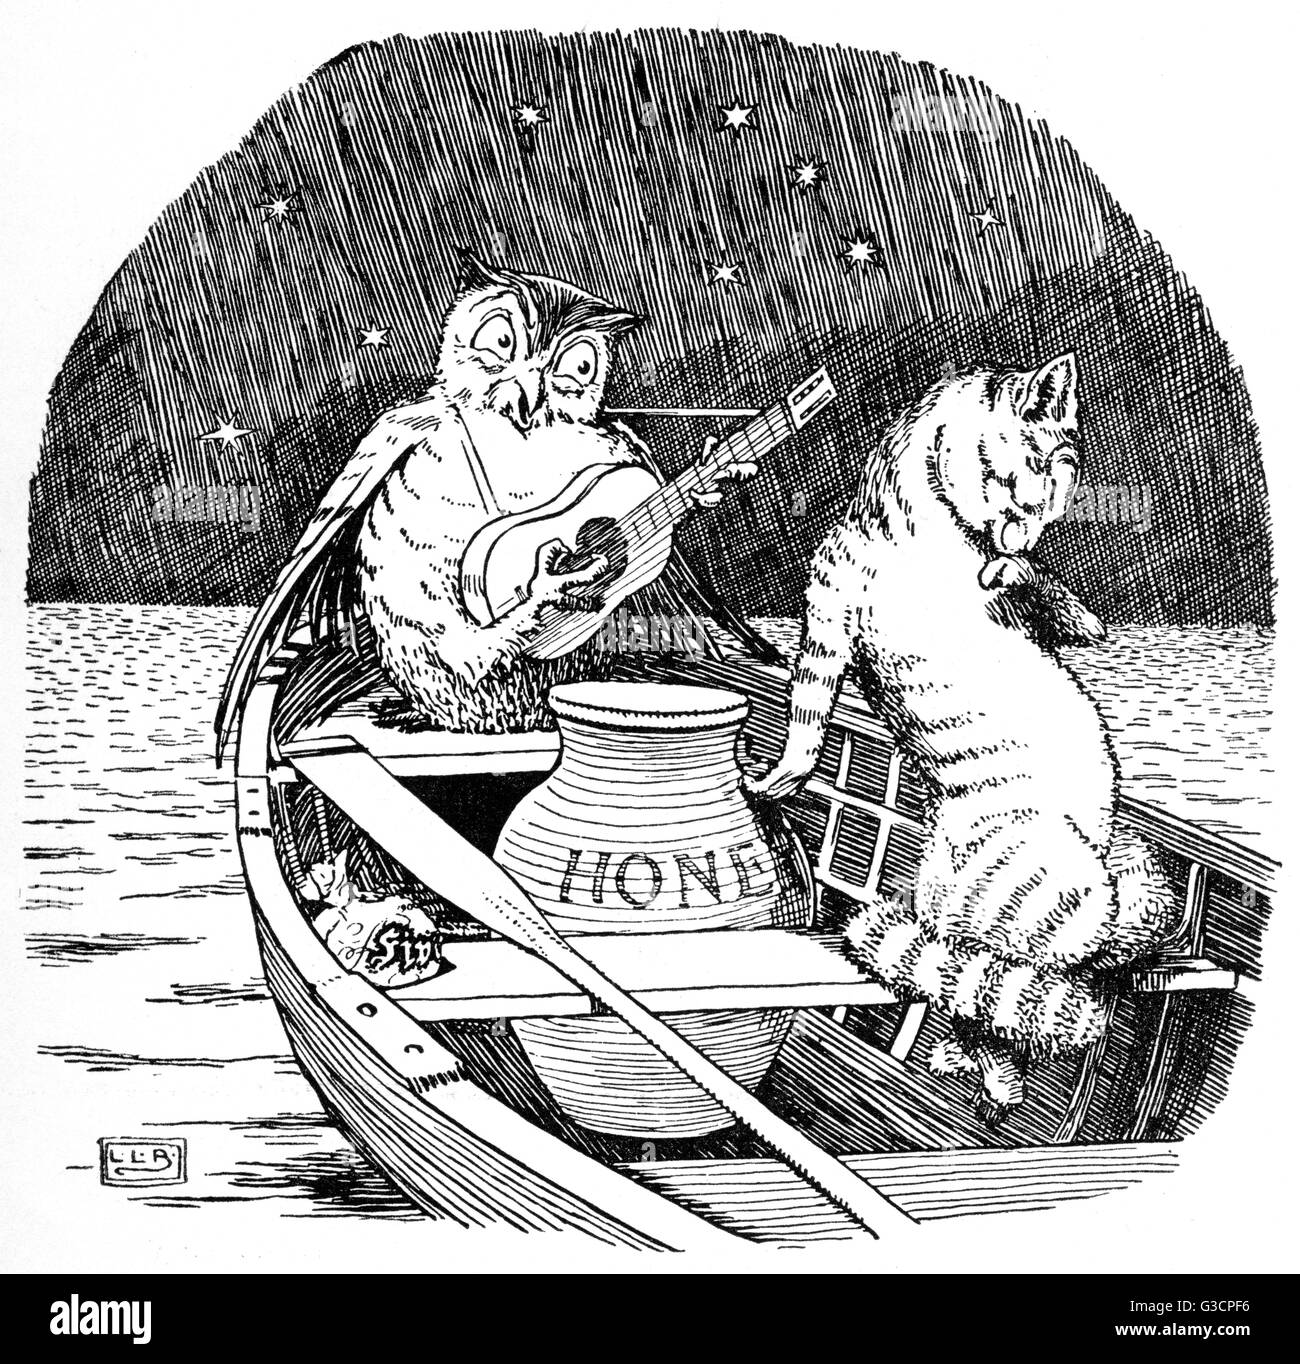 The Owl And The Pussycat By Edward Lear Heading Off To Sea In Their Pea Green Boat Date 